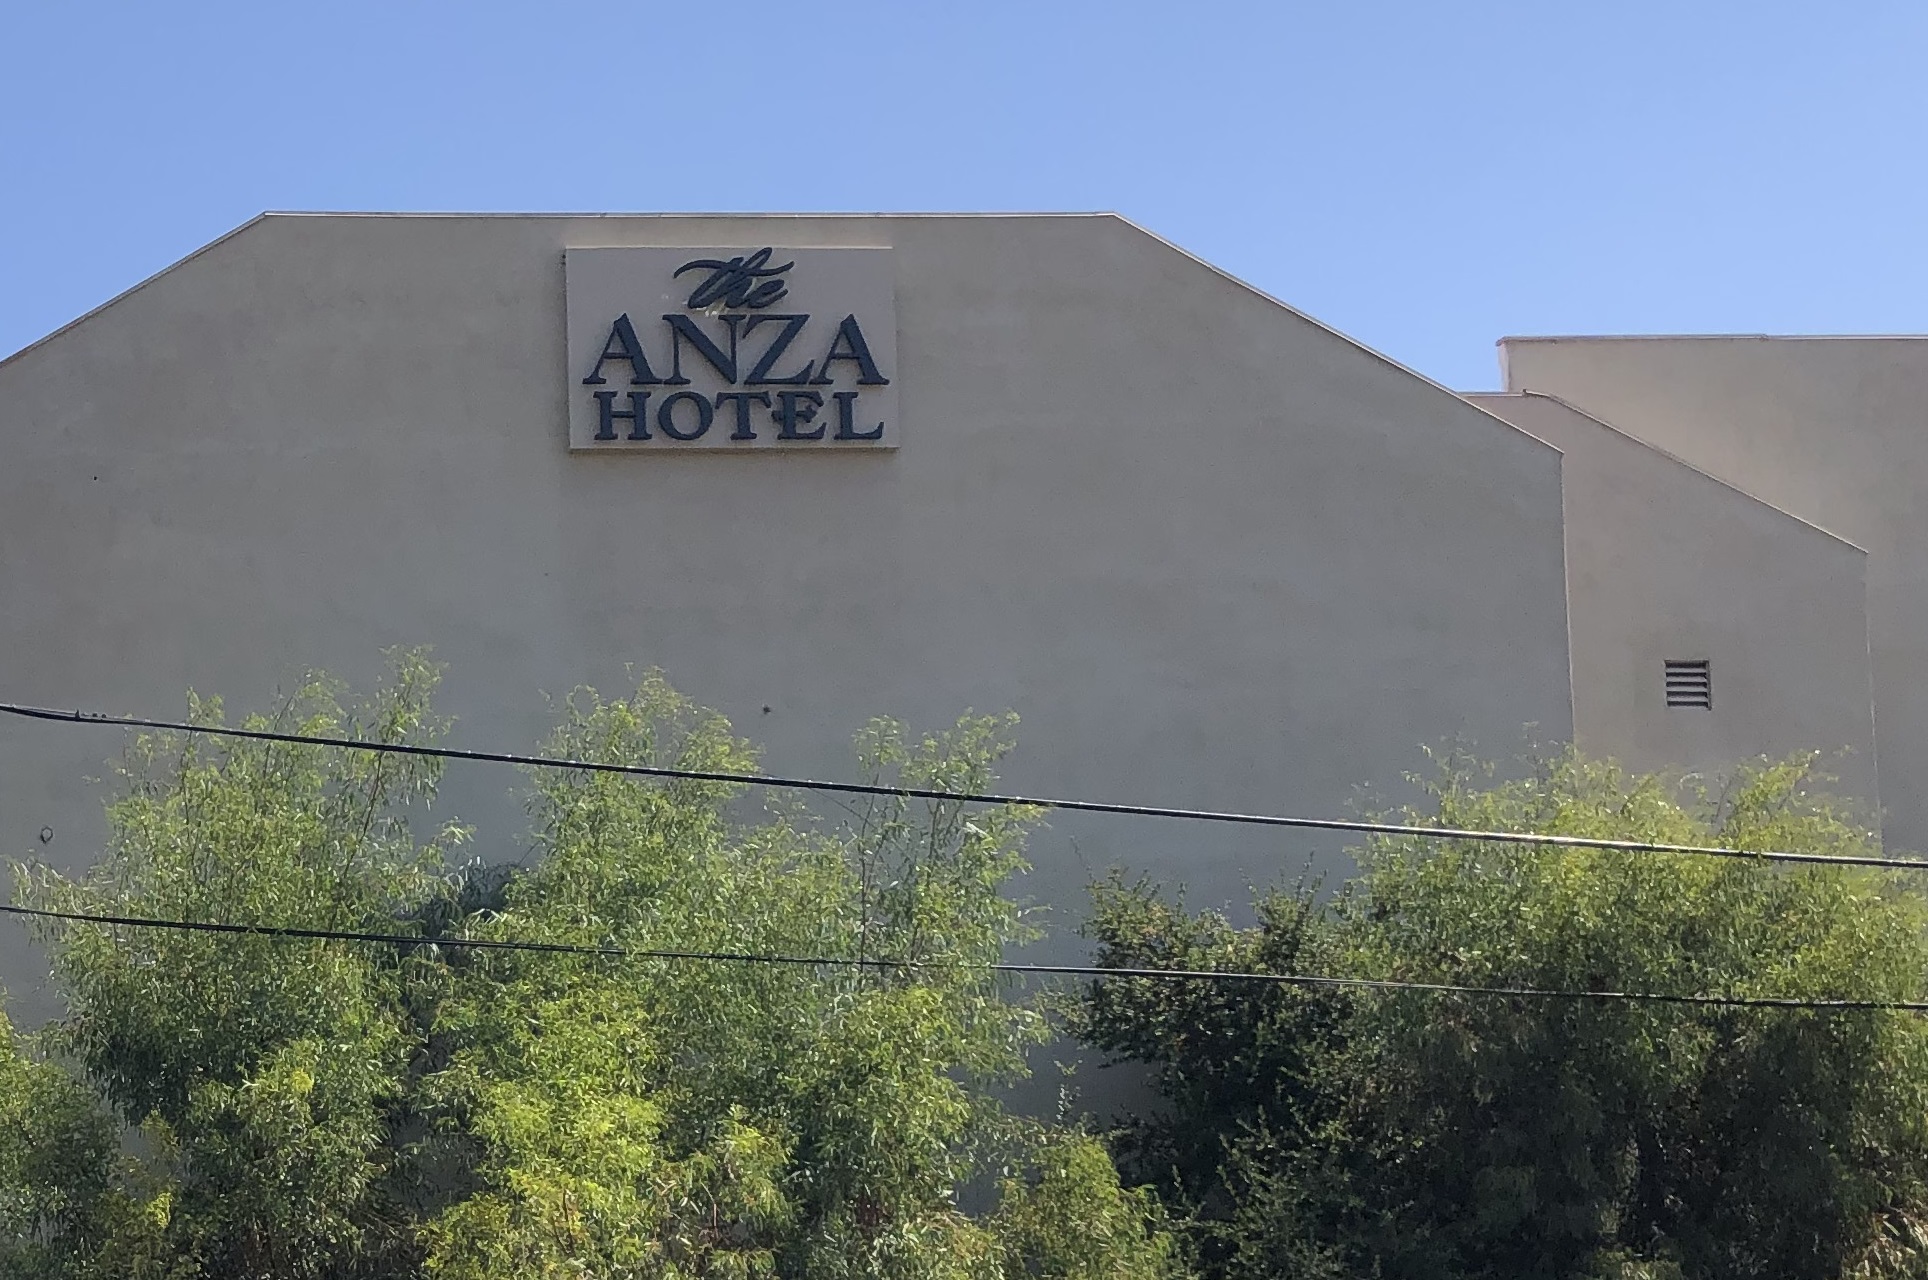 You are currently viewing Hotel Channel Letters for Anza in Calabasas